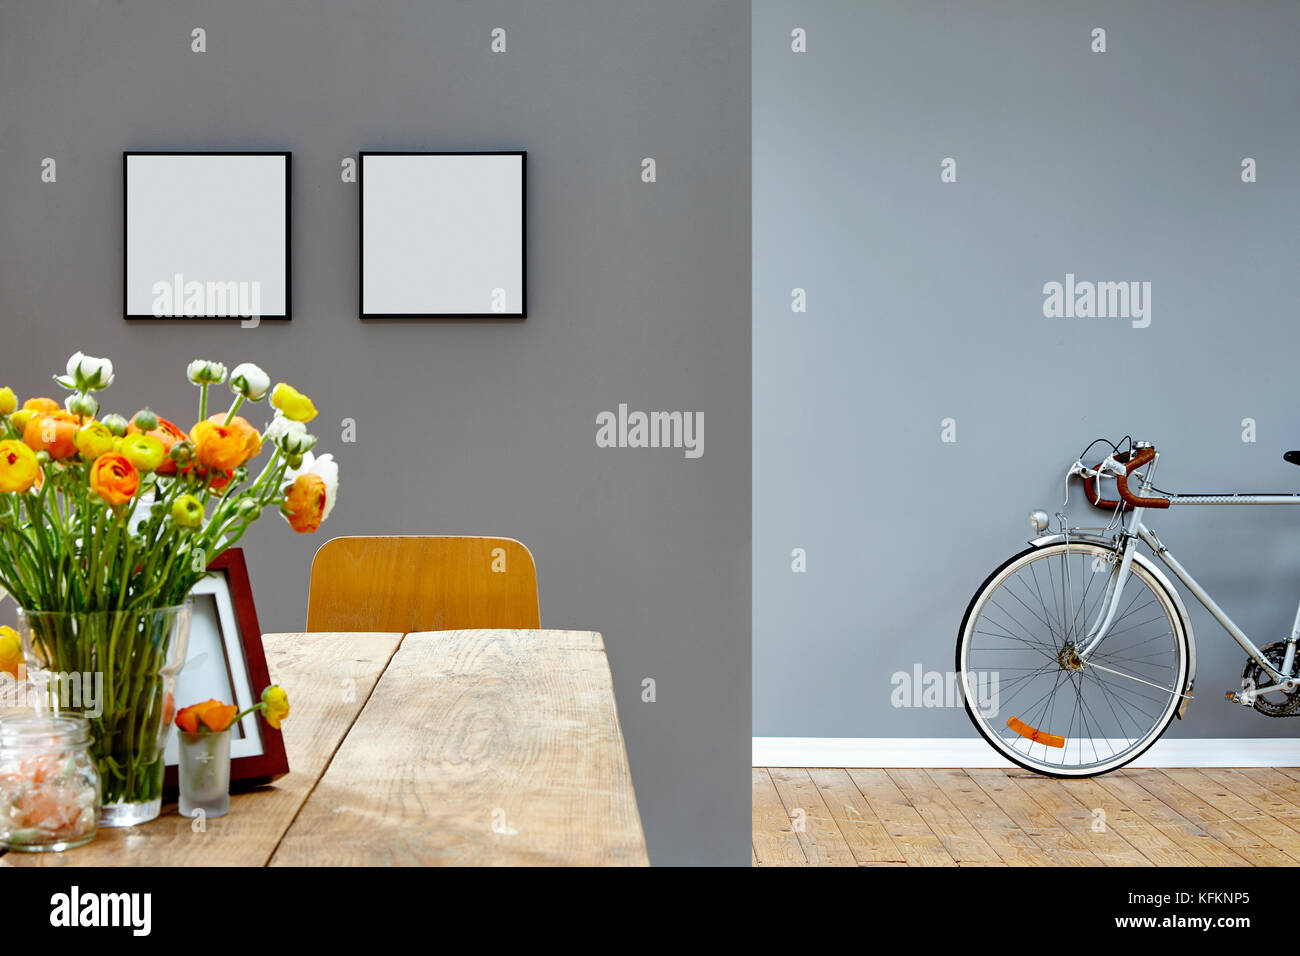 vivid wooden dining table and old bike in background Stock Photo